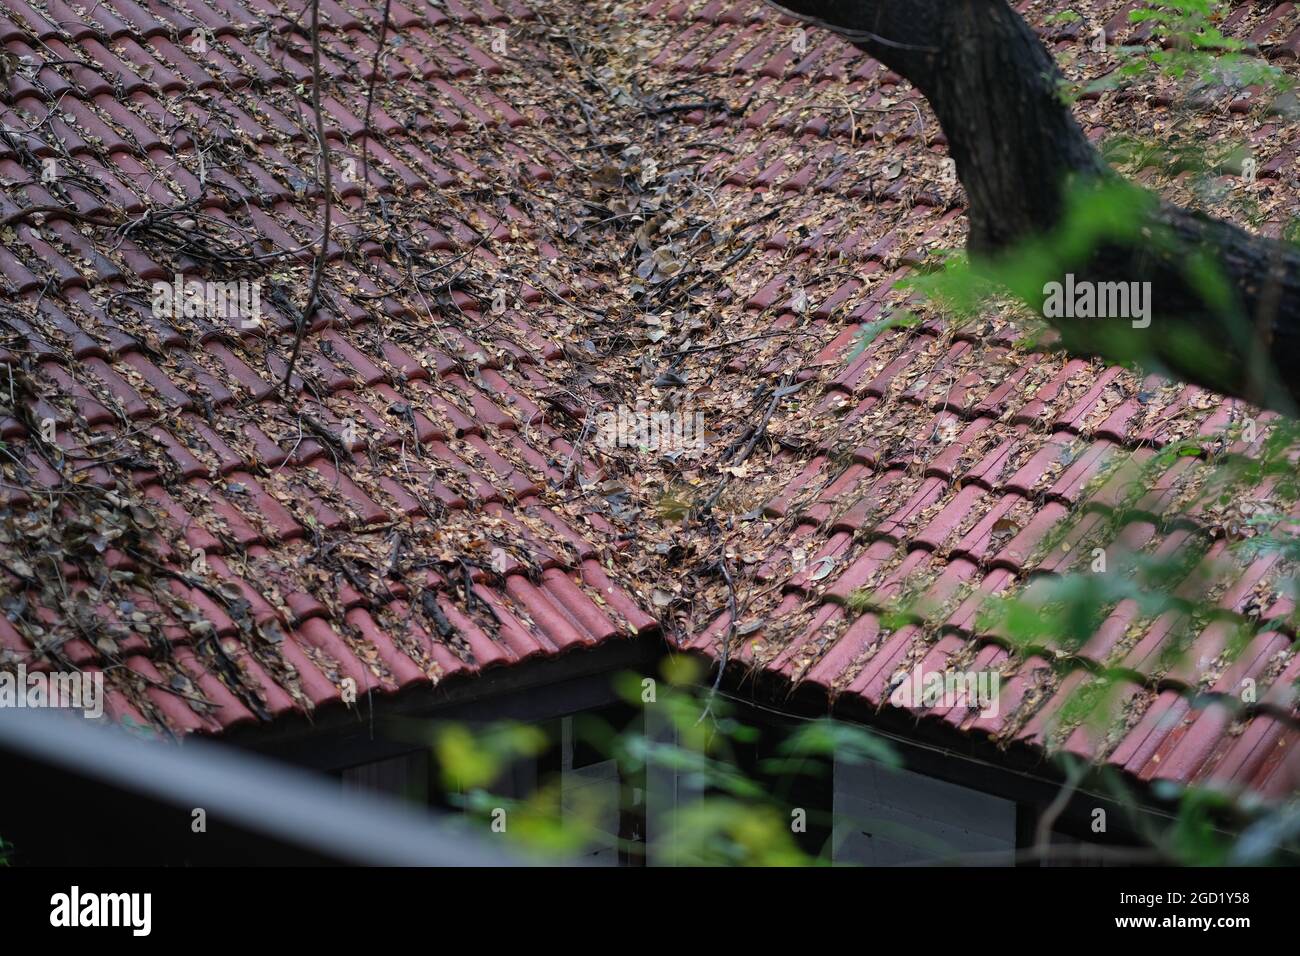 A tiled roof of old house, covered with fallen leaves Stock Photo